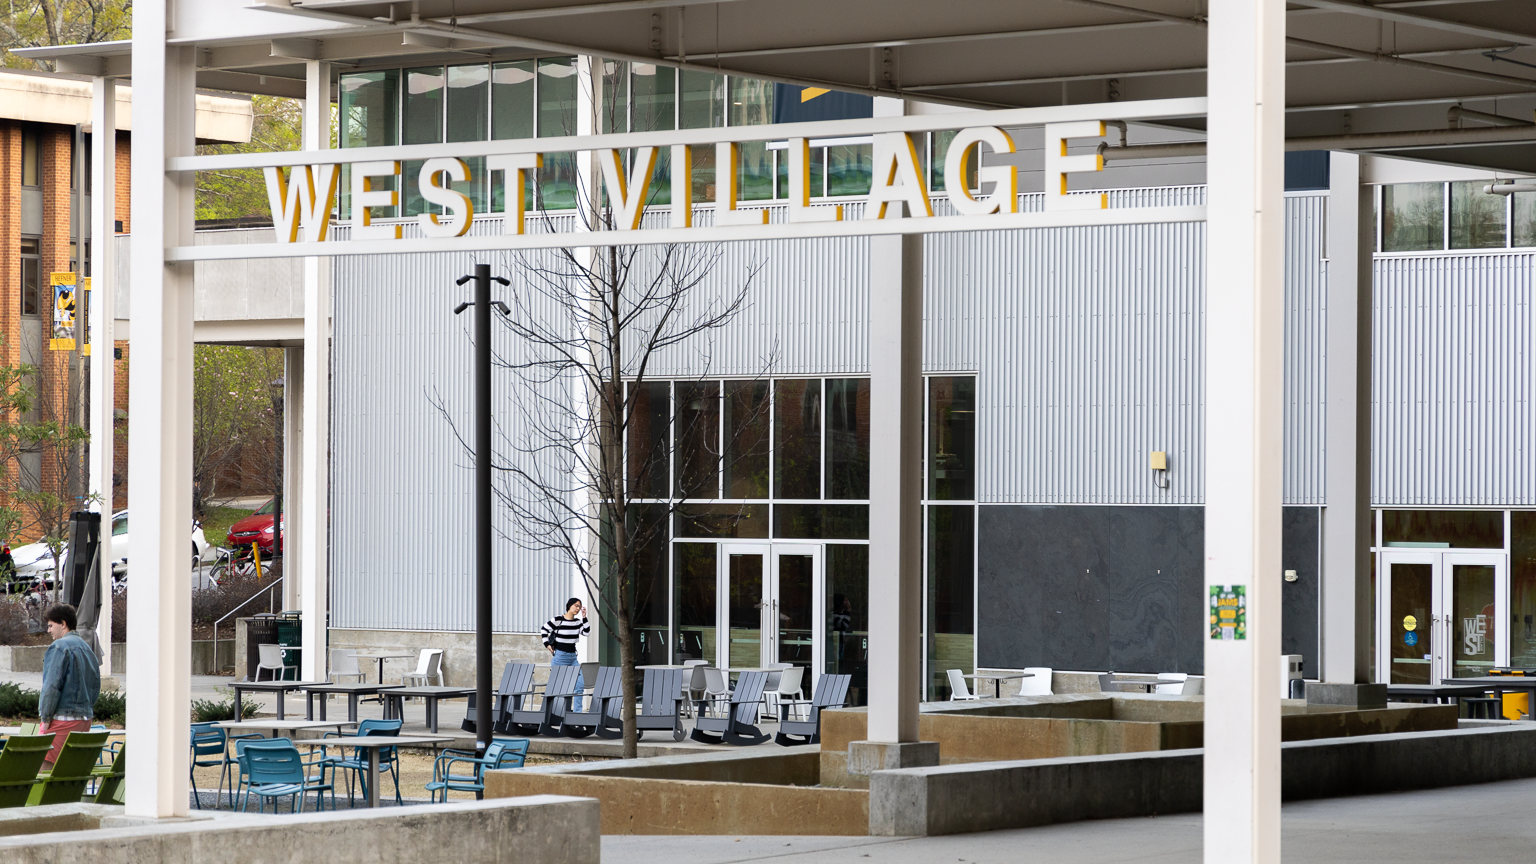 Entryway of West Village complex, showing the West Village sign and the music wing in the background